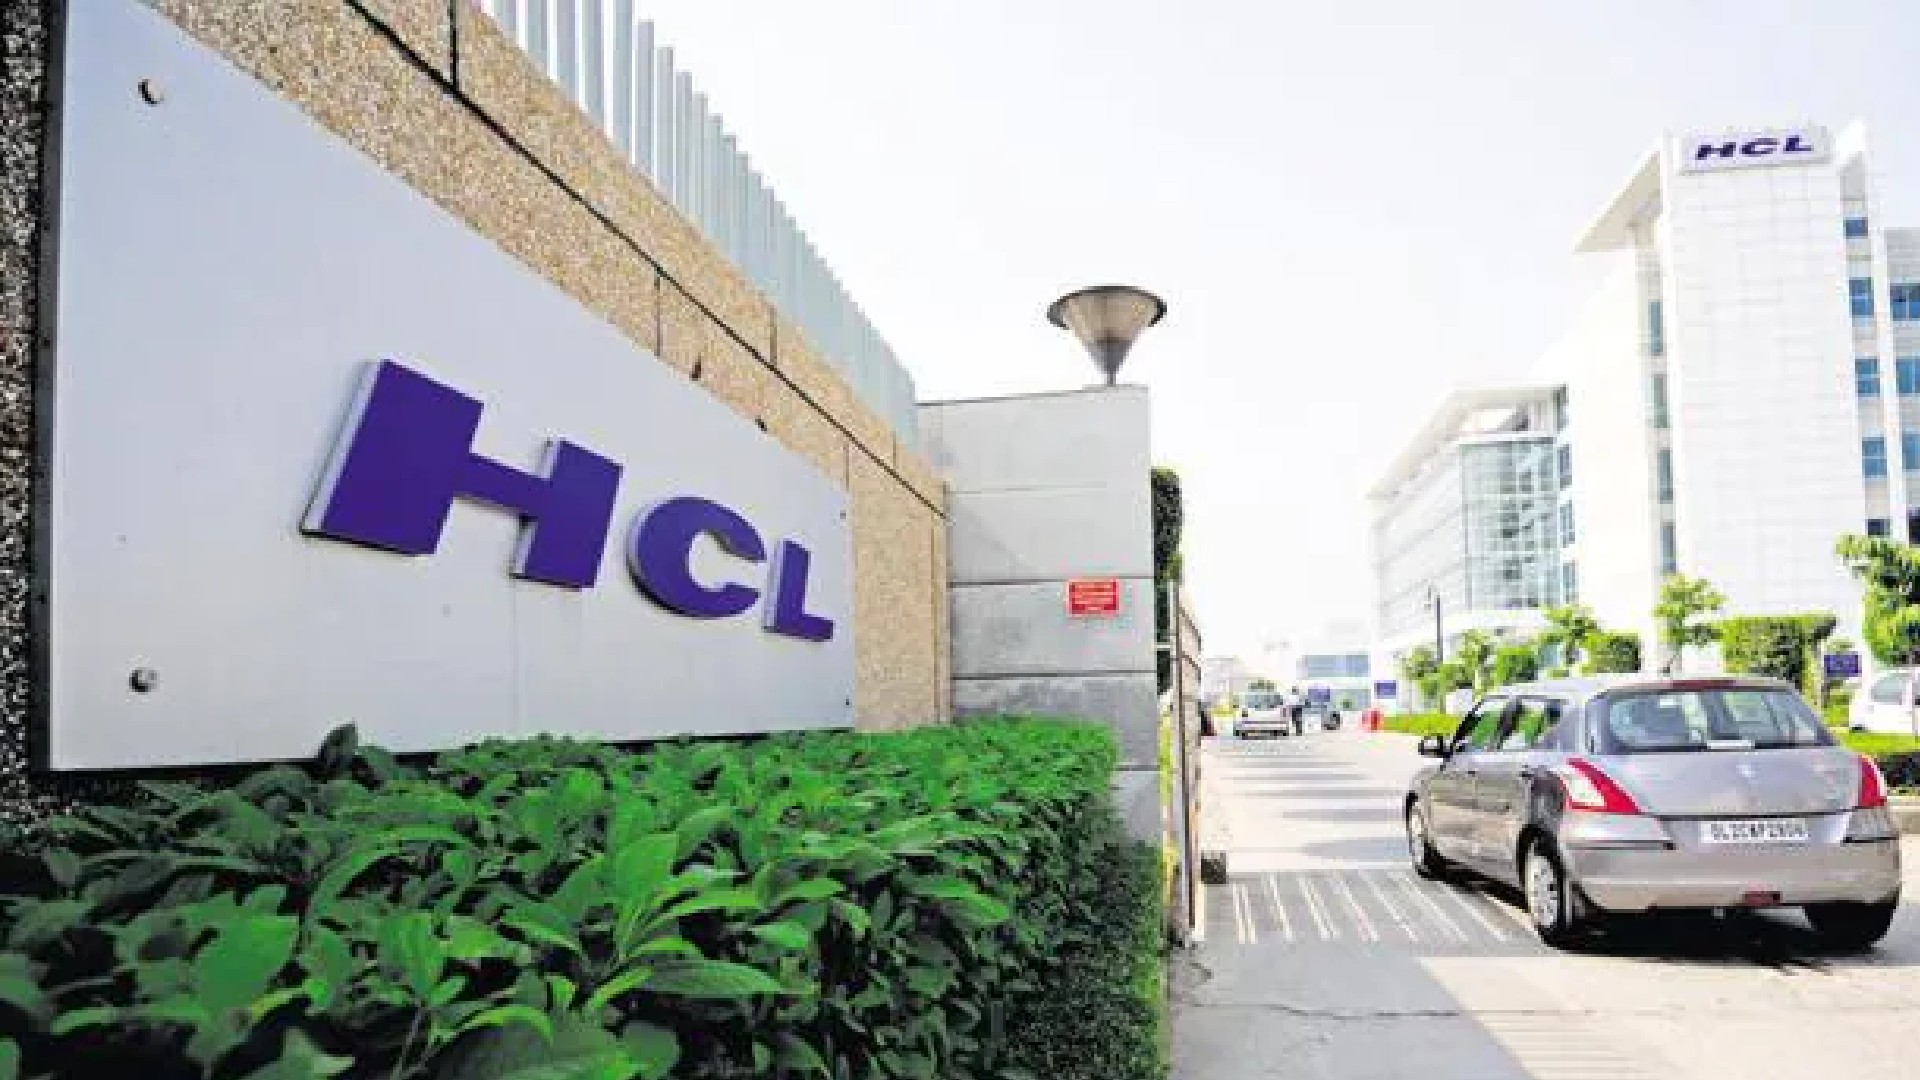 HCL Will Hire 1000 Employees In UK For These Critical Skills; UK Hiring Up By 30%